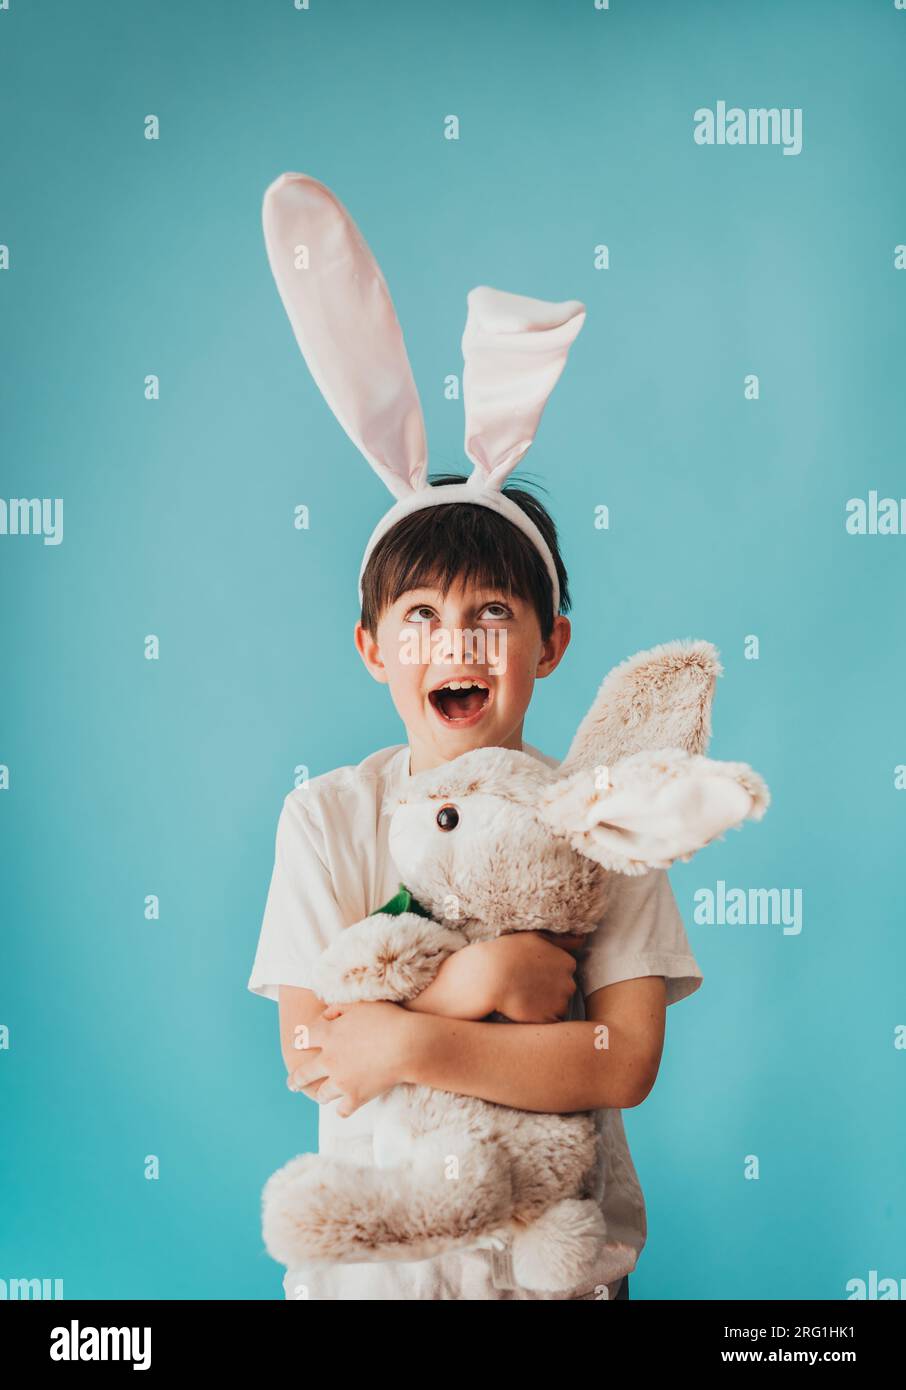 Boy holding stuffed rabbit looking up at bunny ears on his head. Stock Photo